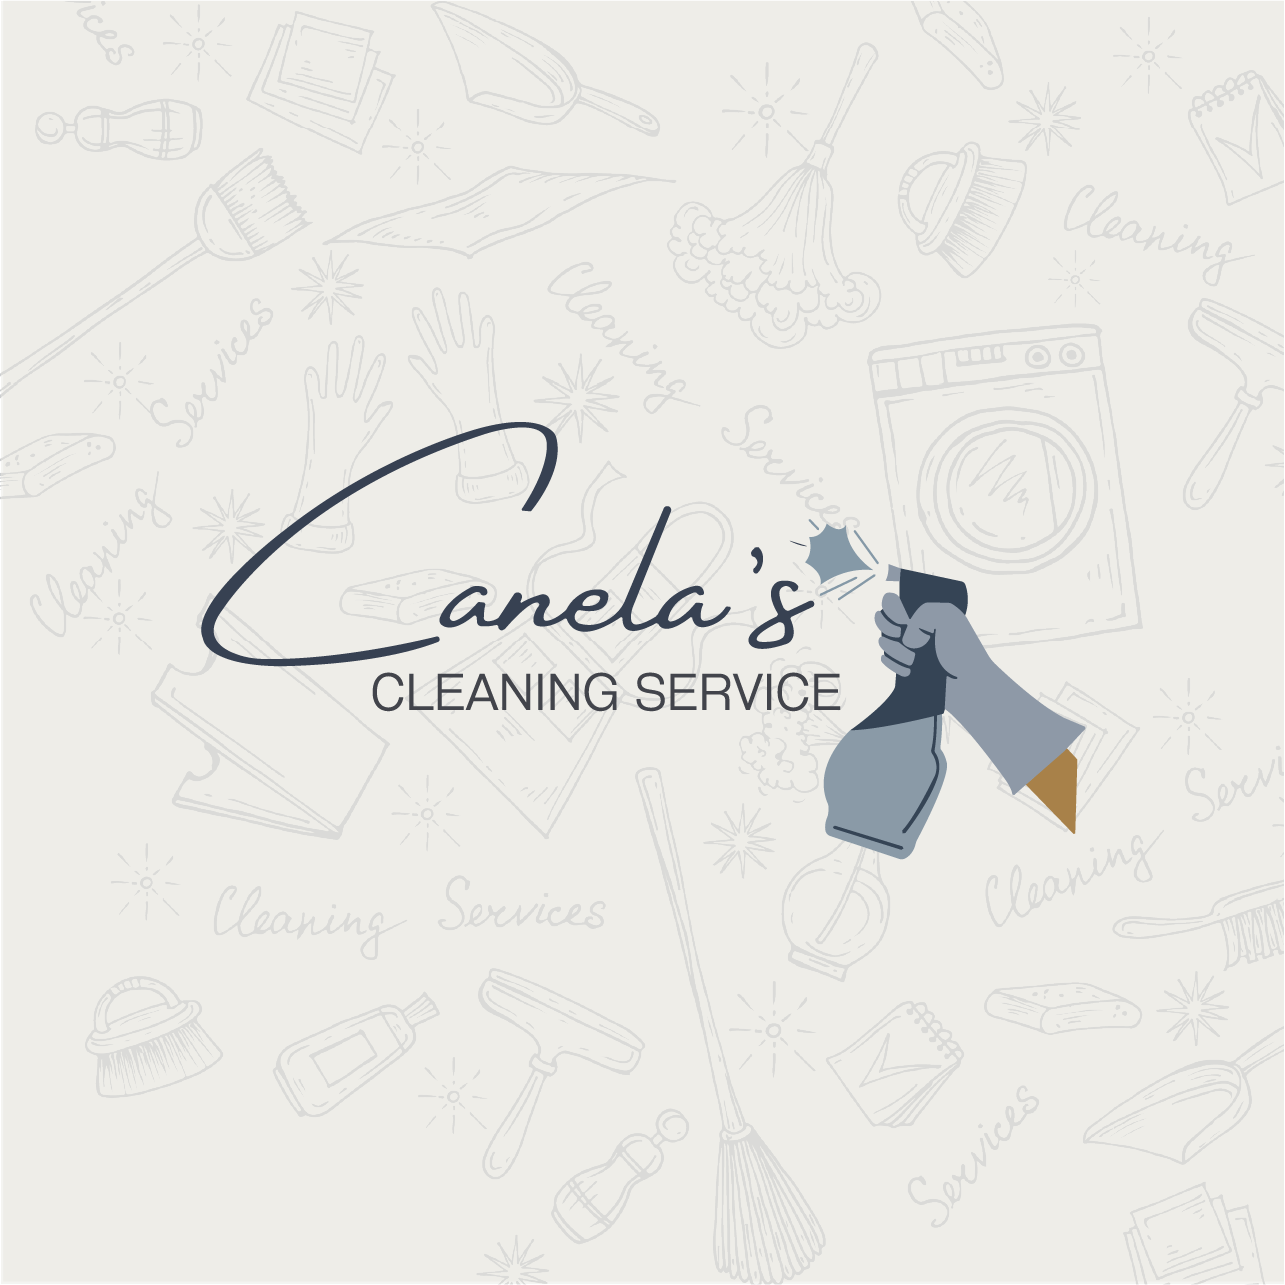 The logo for canela 's cleaning service shows a person holding a spray bottle